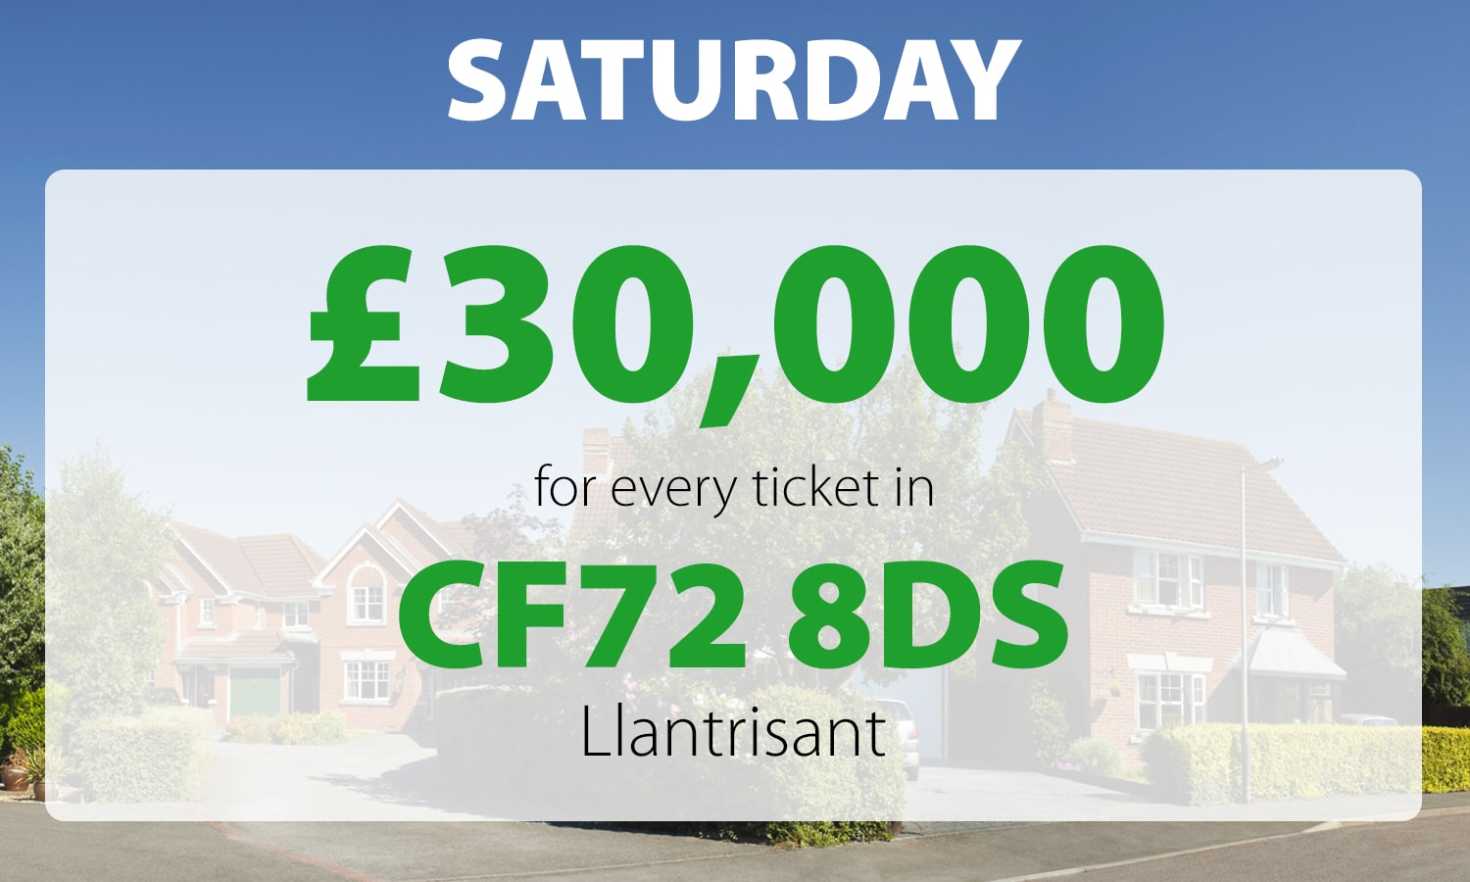 Two lucky winners won £30,000 for each ticket they play with in Saturday's Street Prize